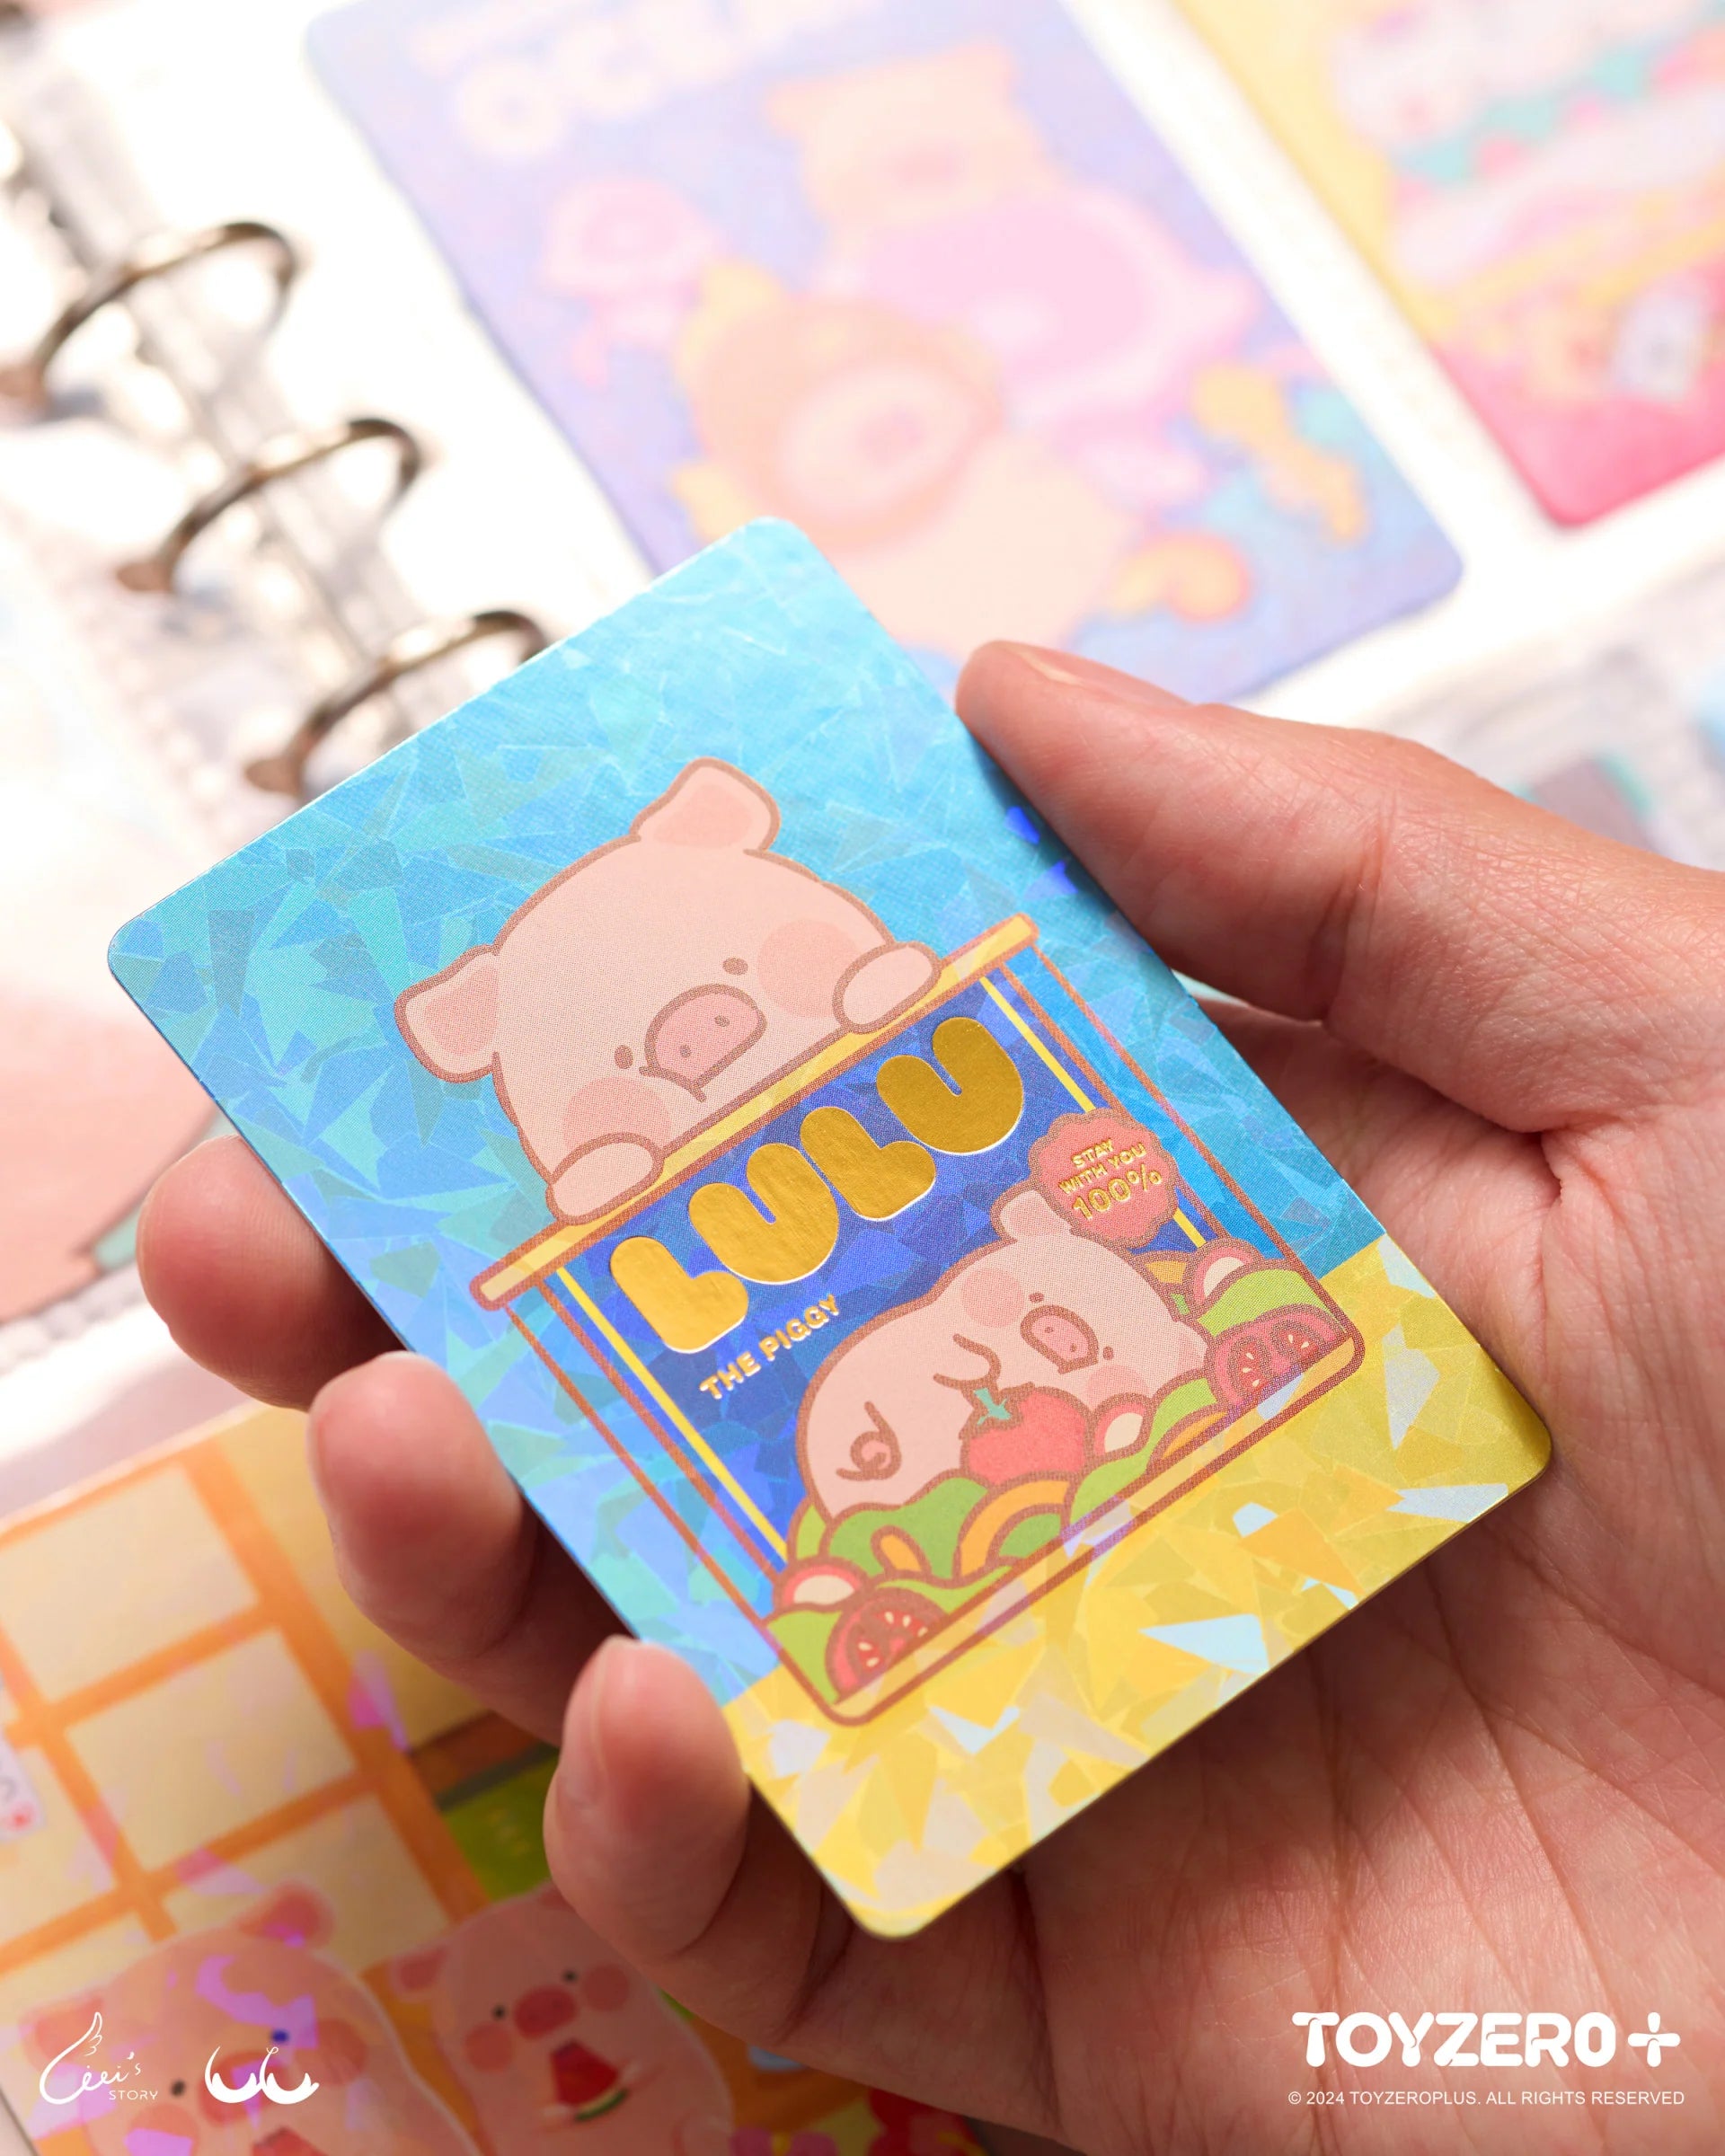 LuLu the Piggy Generic - Collectible Card - Preorder